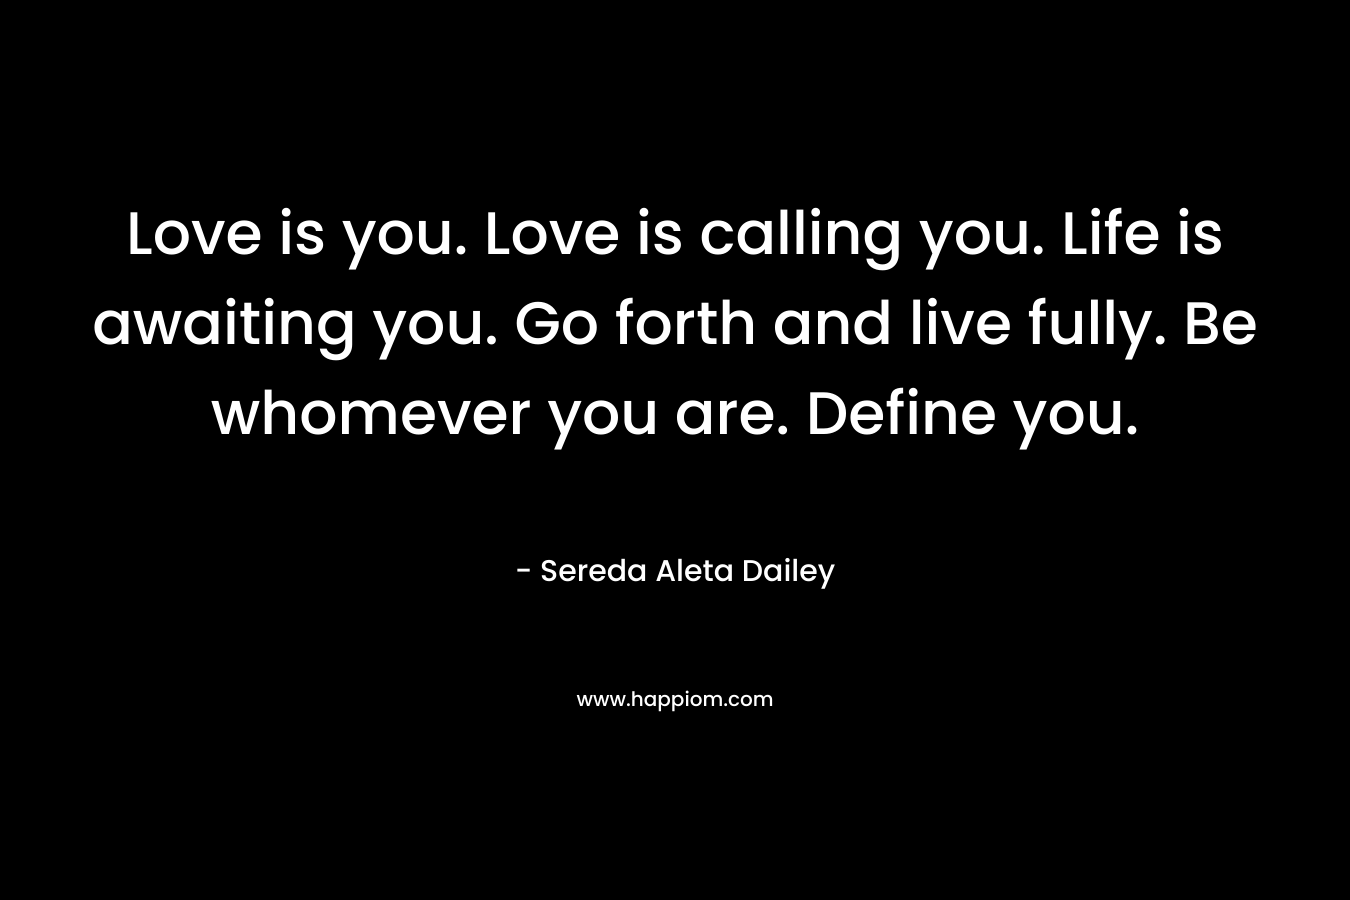 Love is you. Love is calling you. Life is awaiting you. Go forth and live fully. Be whomever you are. Define you.